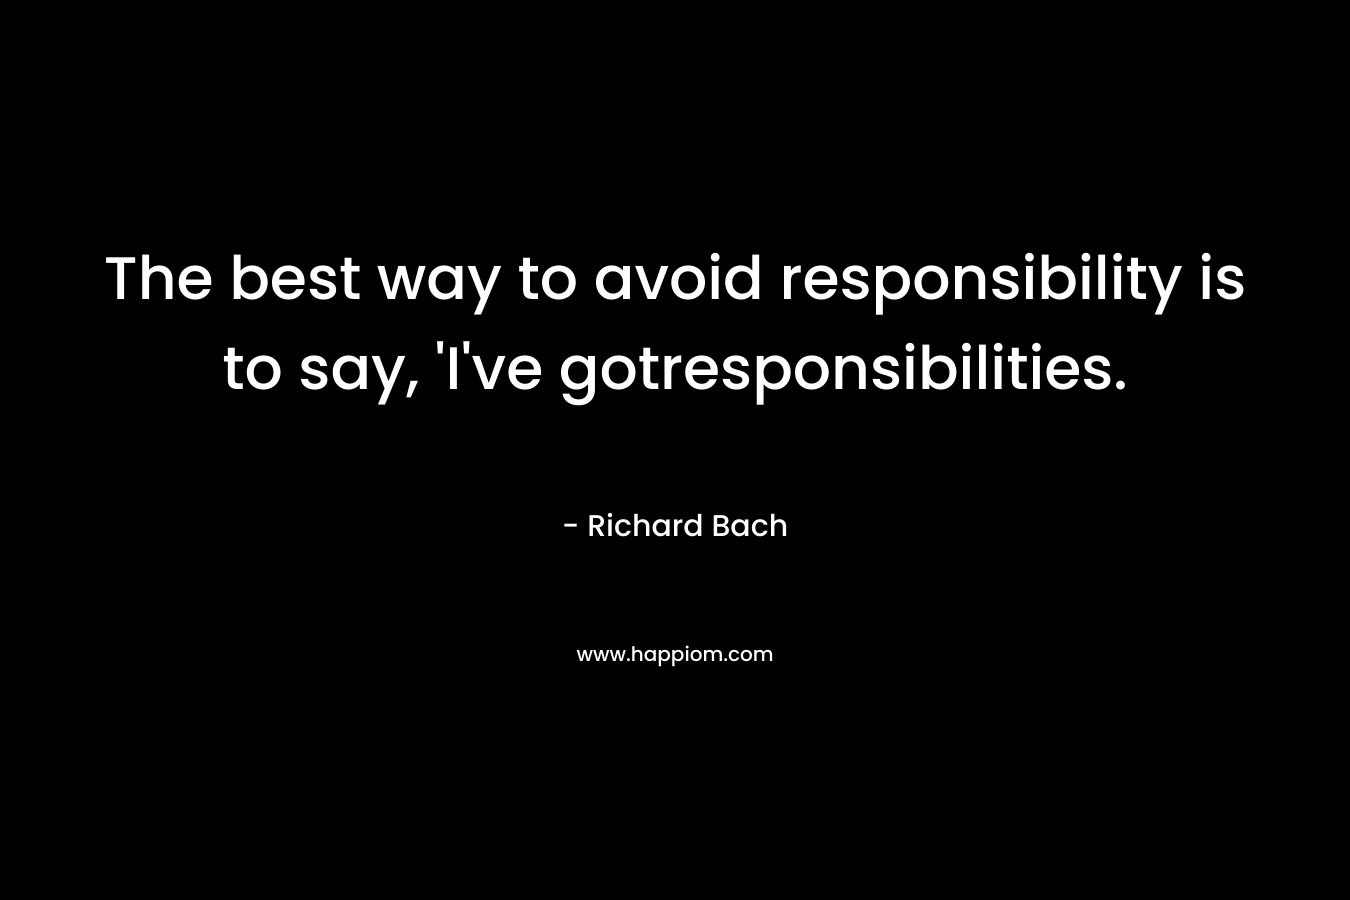 The best way to avoid responsibility is to say, ‘I’ve gotresponsibilities. – Richard Bach